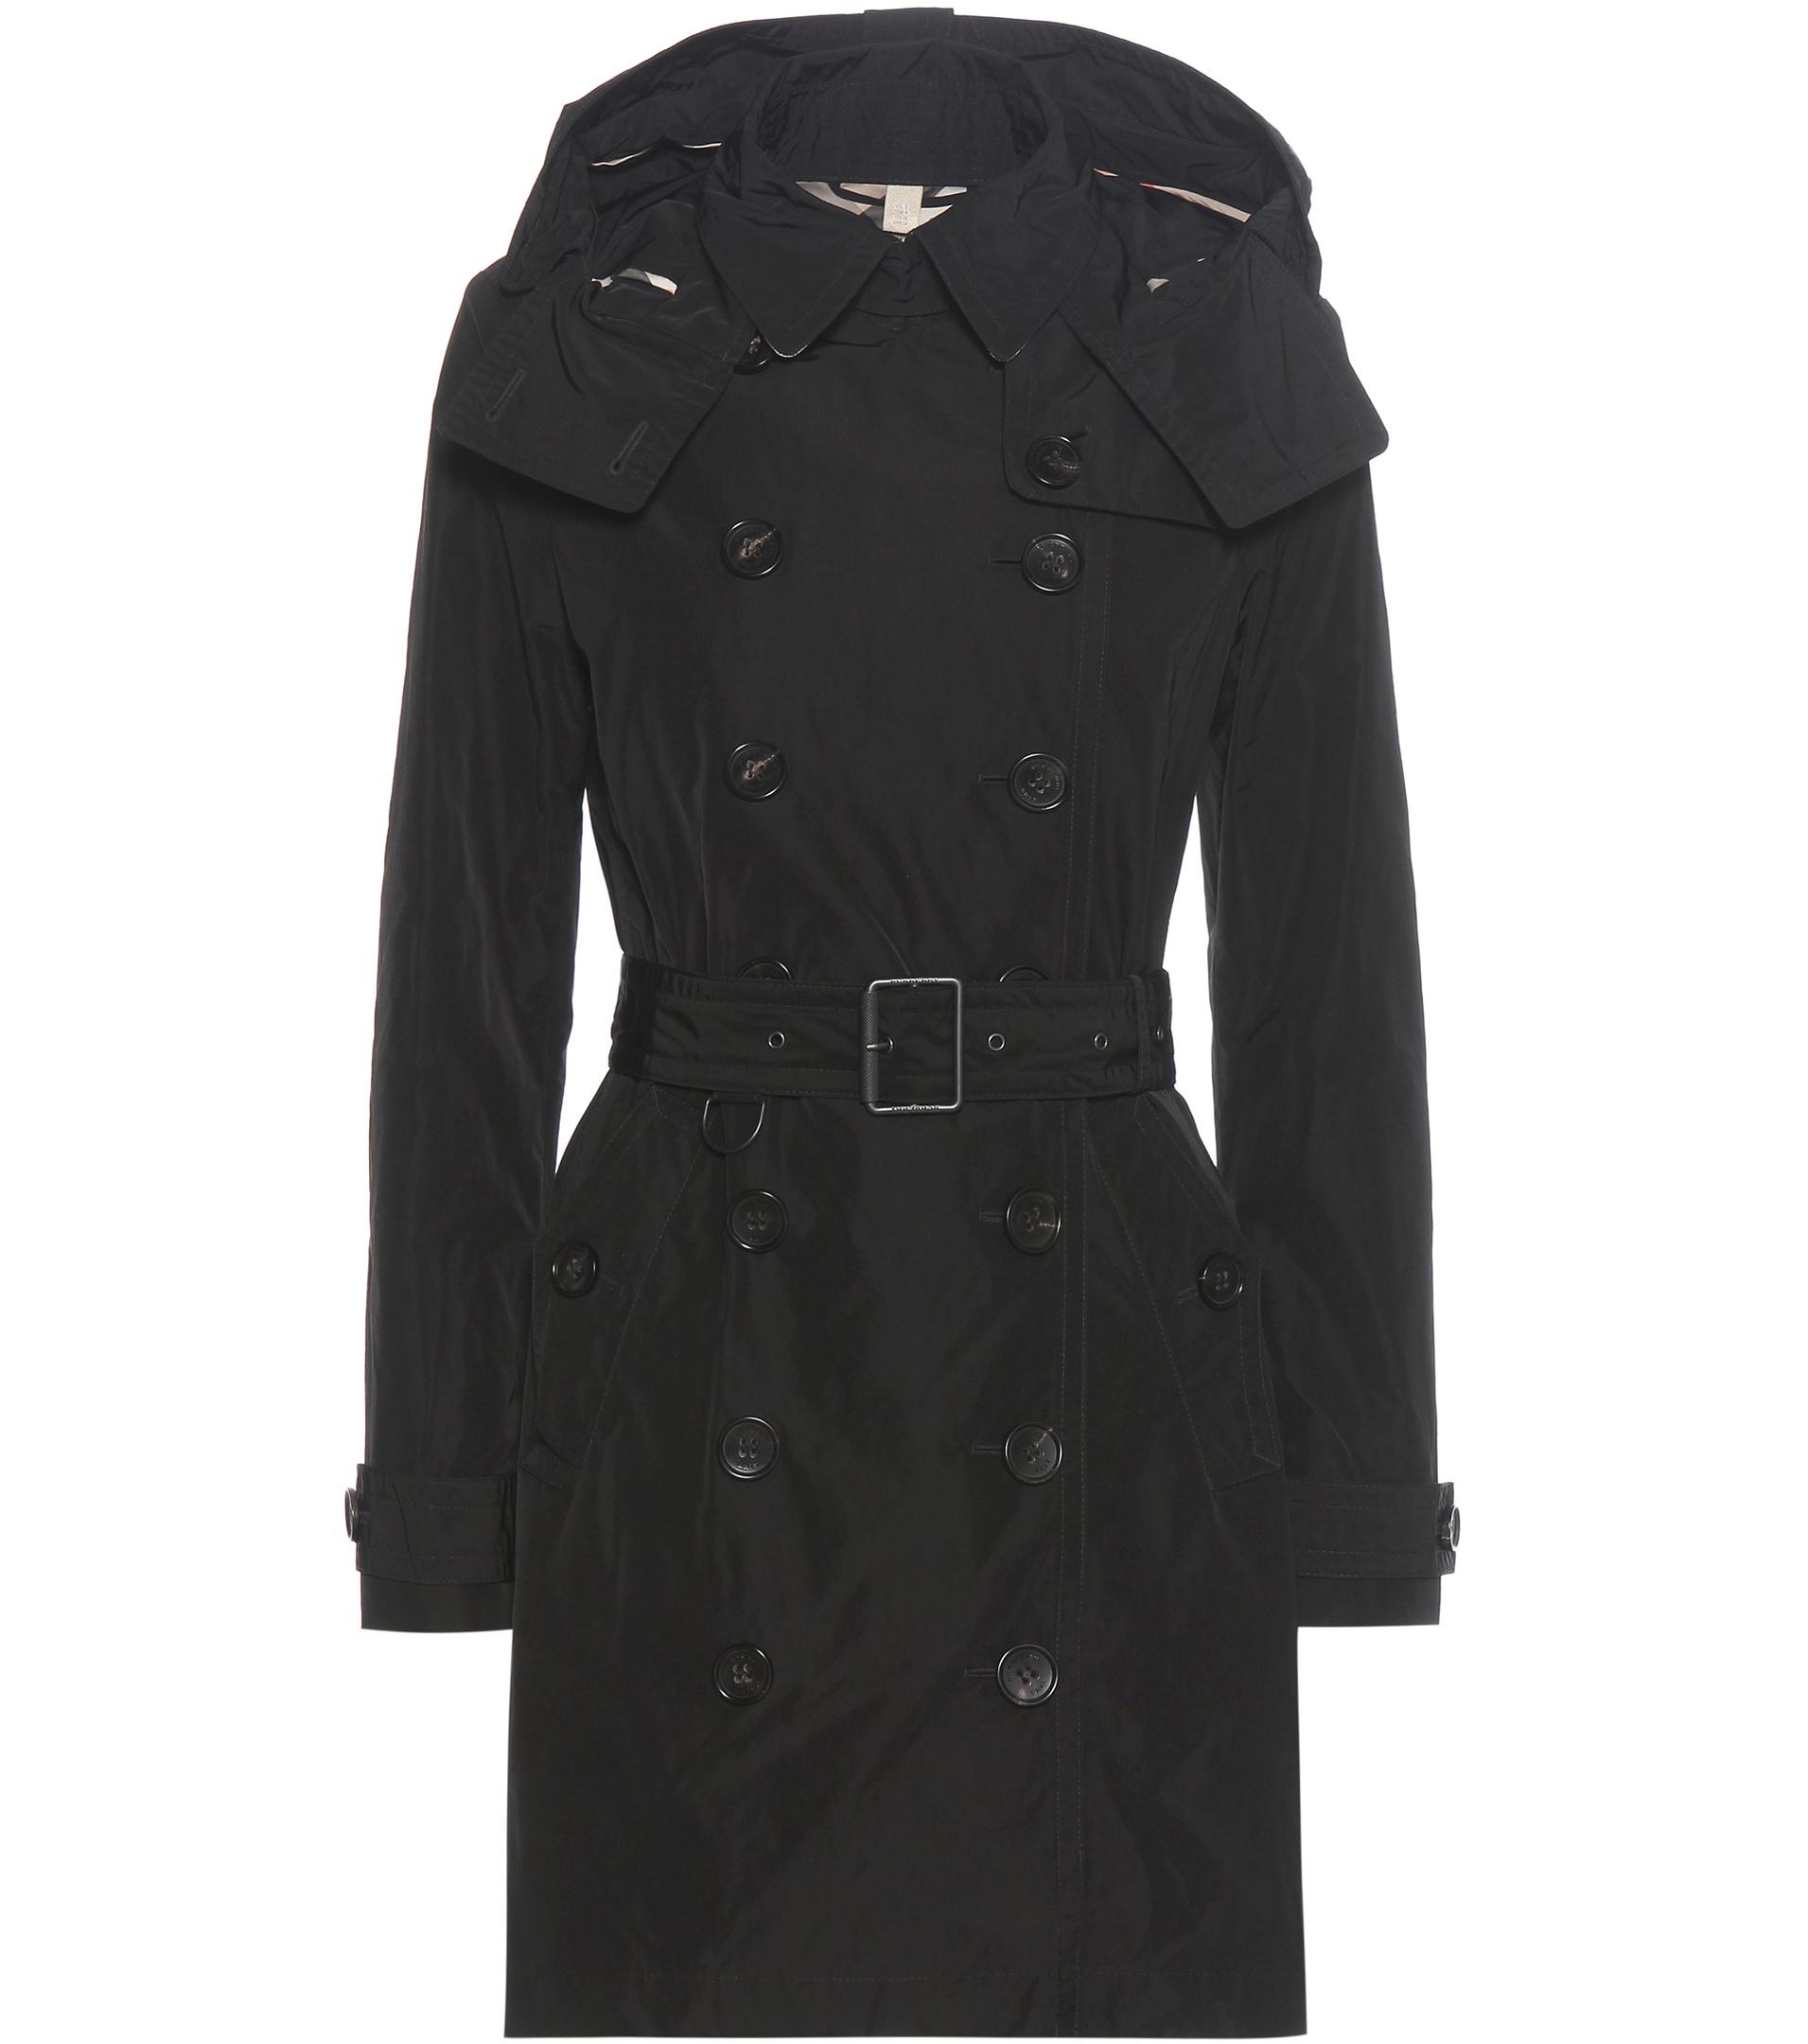 Burberry Balmoral Trench Coat in Black - Lyst